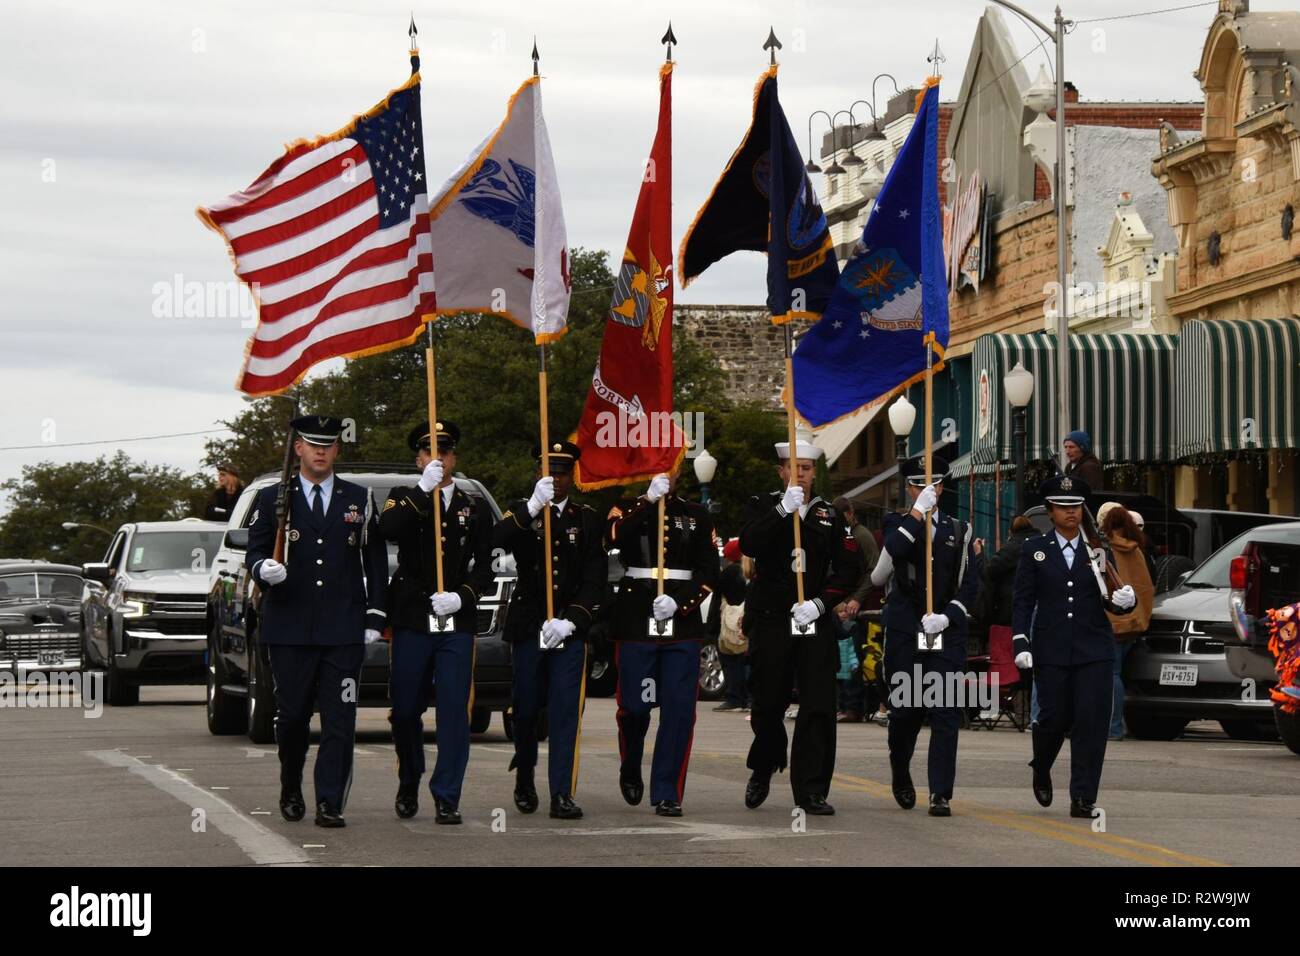 1st Infantry Division honored in historic Veterans Day ceremony in Chicago